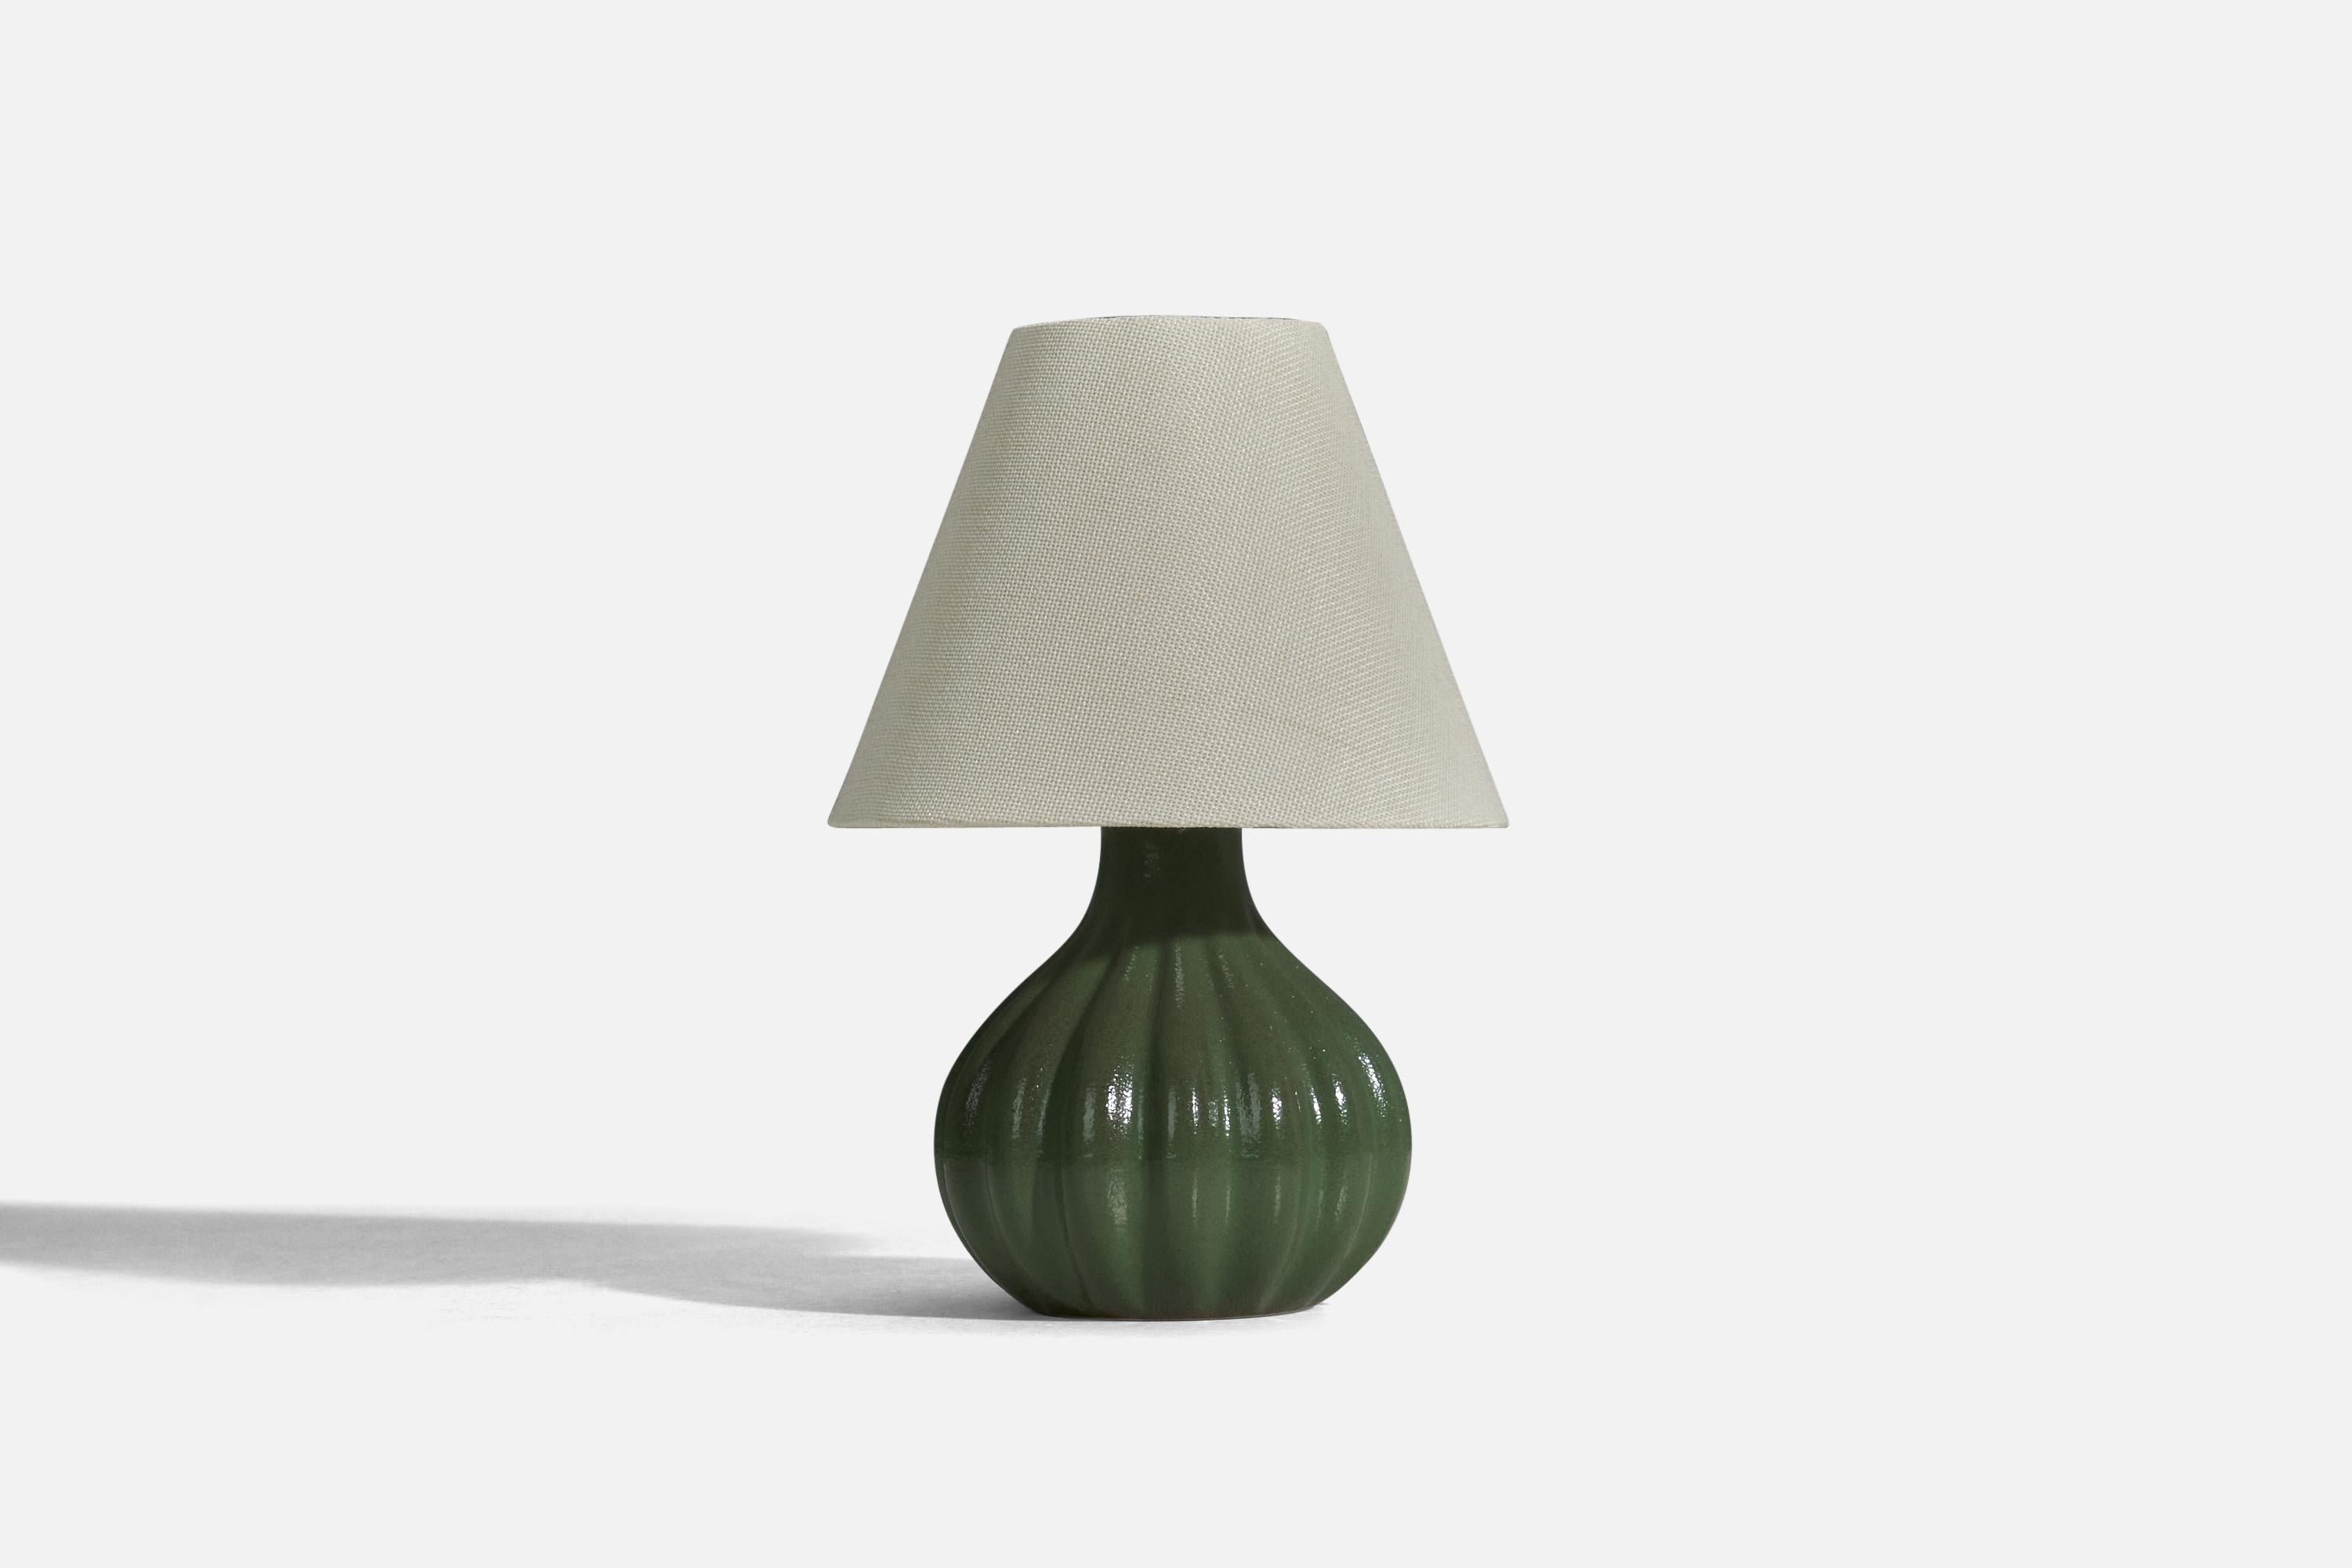 A green glazed stoneware table lamp designed and produced by Ego Stengods, Sweden, 1960s.

Sold without Lampshade
Dimensions of lamp (inches) : 8.25 x 5.56 x 5.56 (height x width x depth)
Dimensions of lampshade (inches) : 3.75 x 8 x 6.25 (top